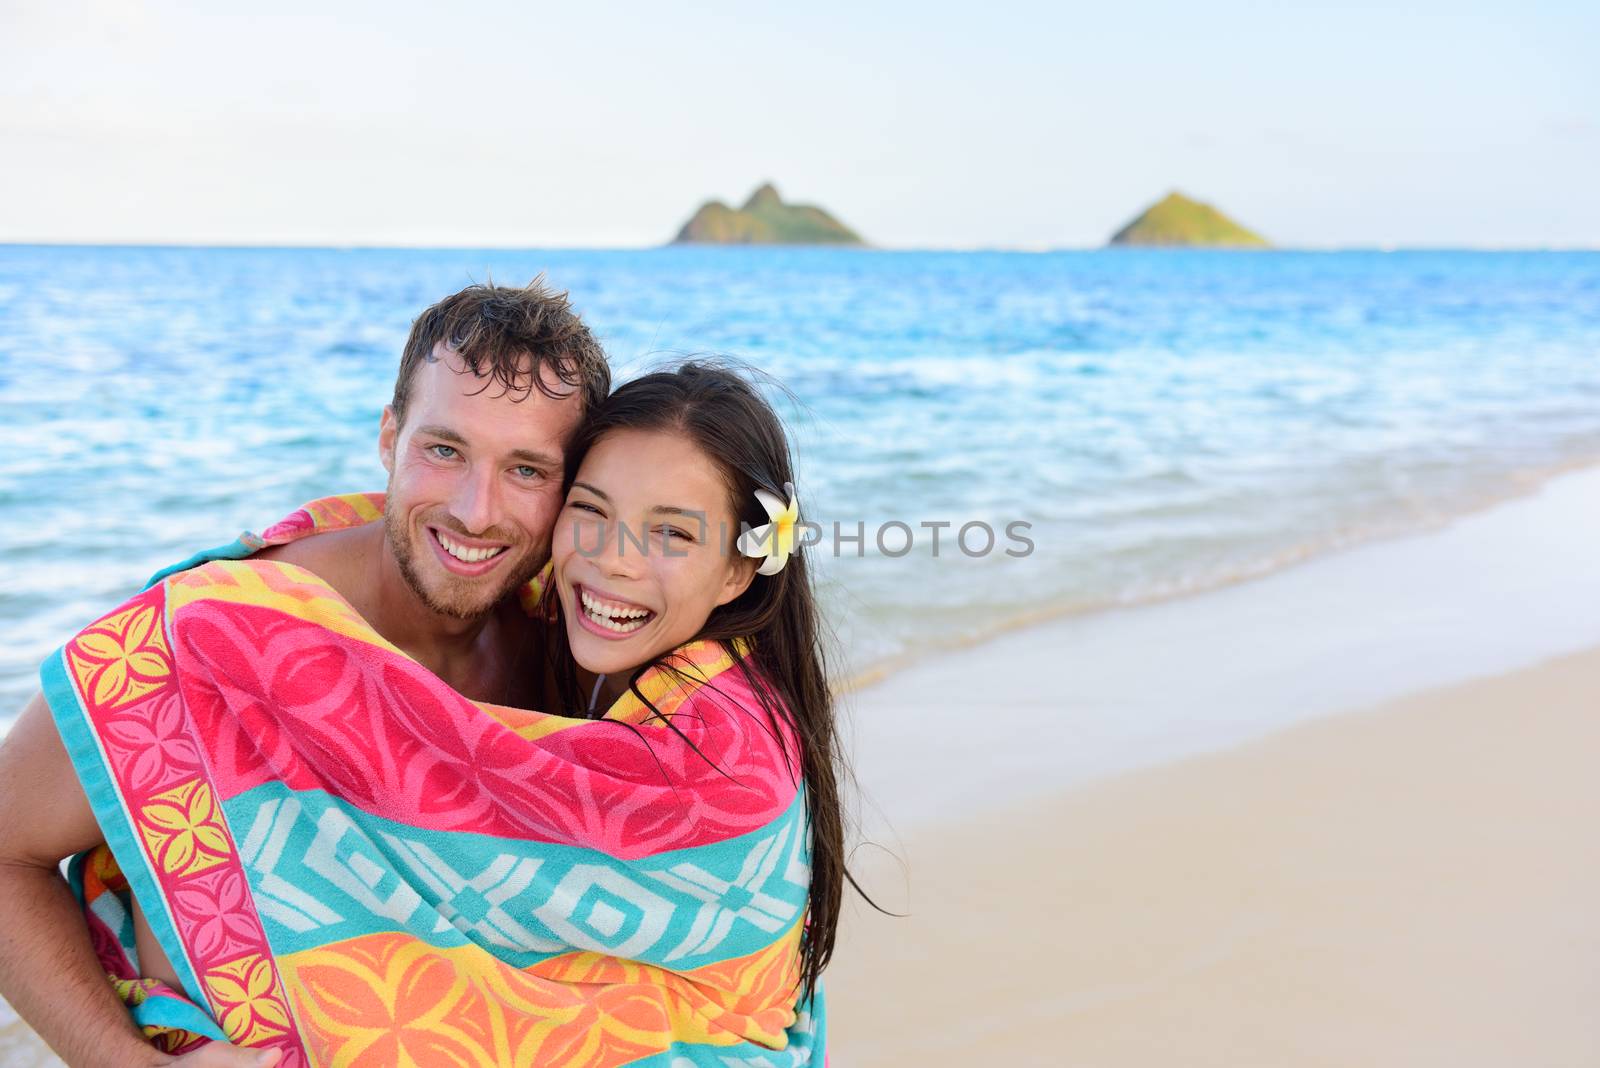 Swimming romantic couple wrapped in bathing towel on beach. Portrait of happy young interracial couple embracing each other having fun during holidays vacation travel. Asian woman, Caucasian man.